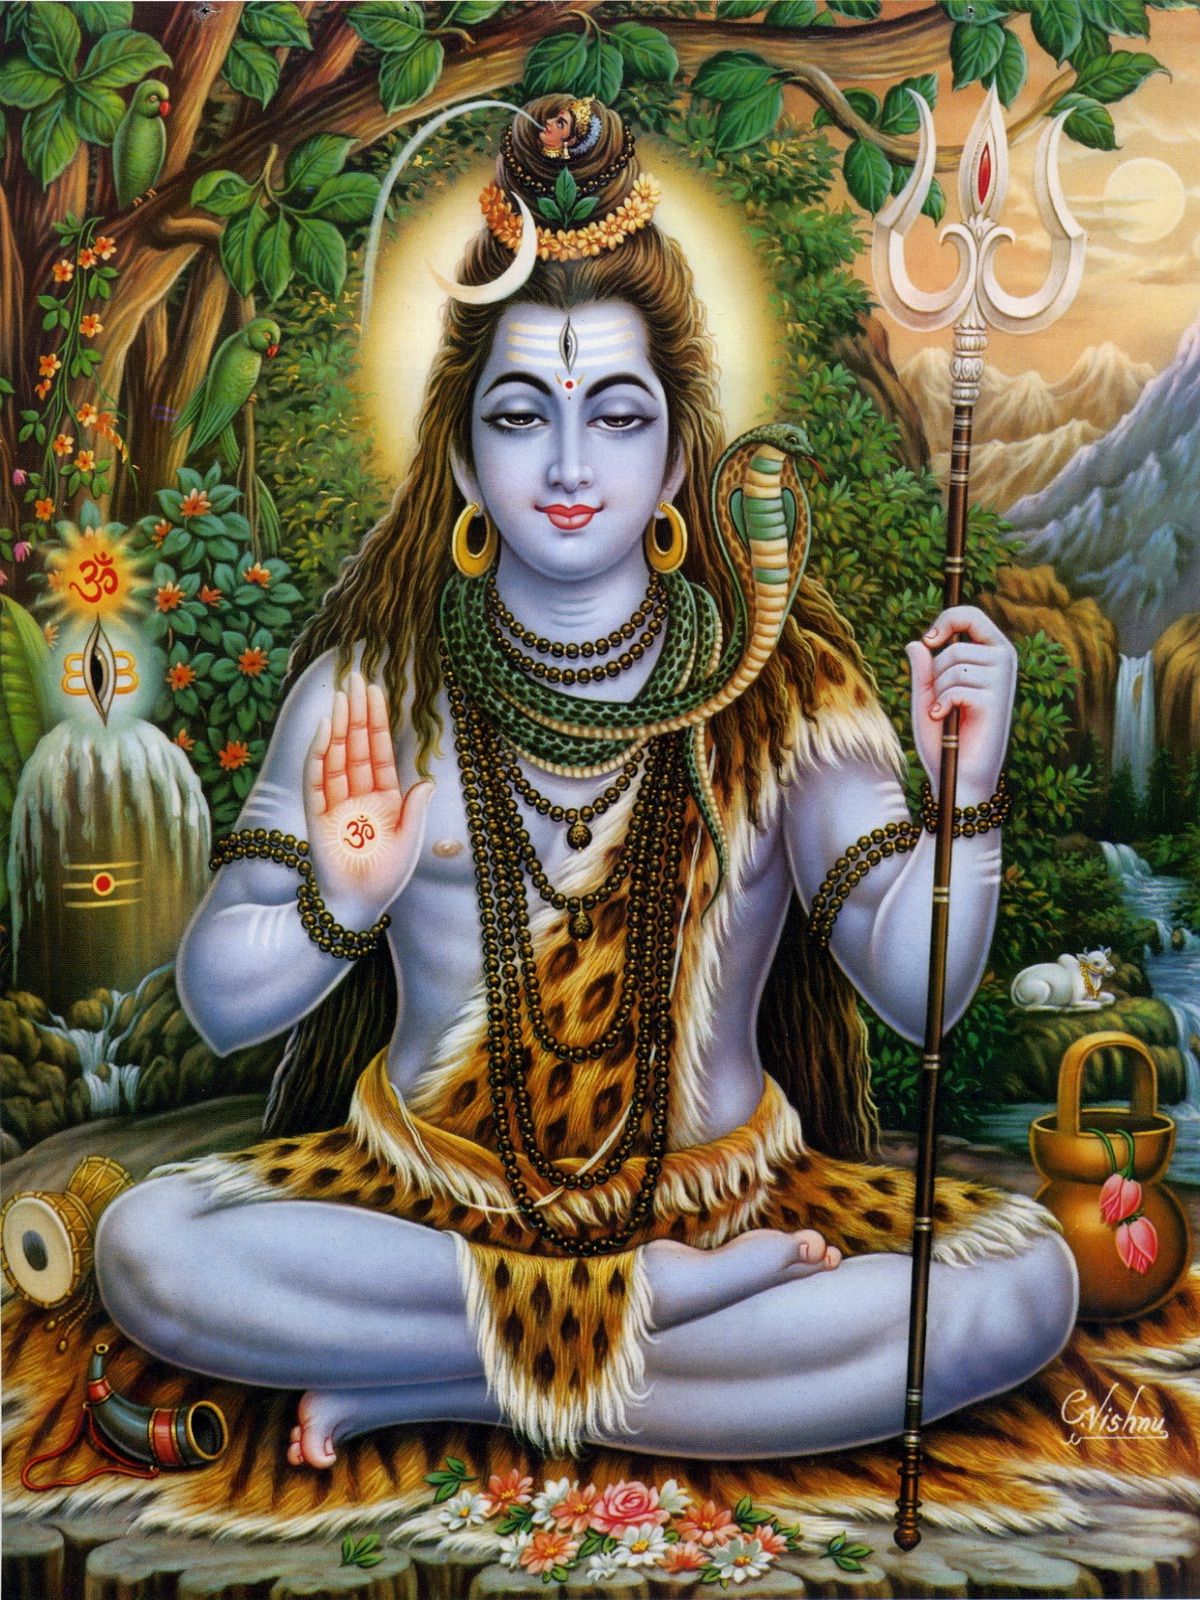 Download Lord Shiva Full HD Wallpapers Gallery | Best Games ...